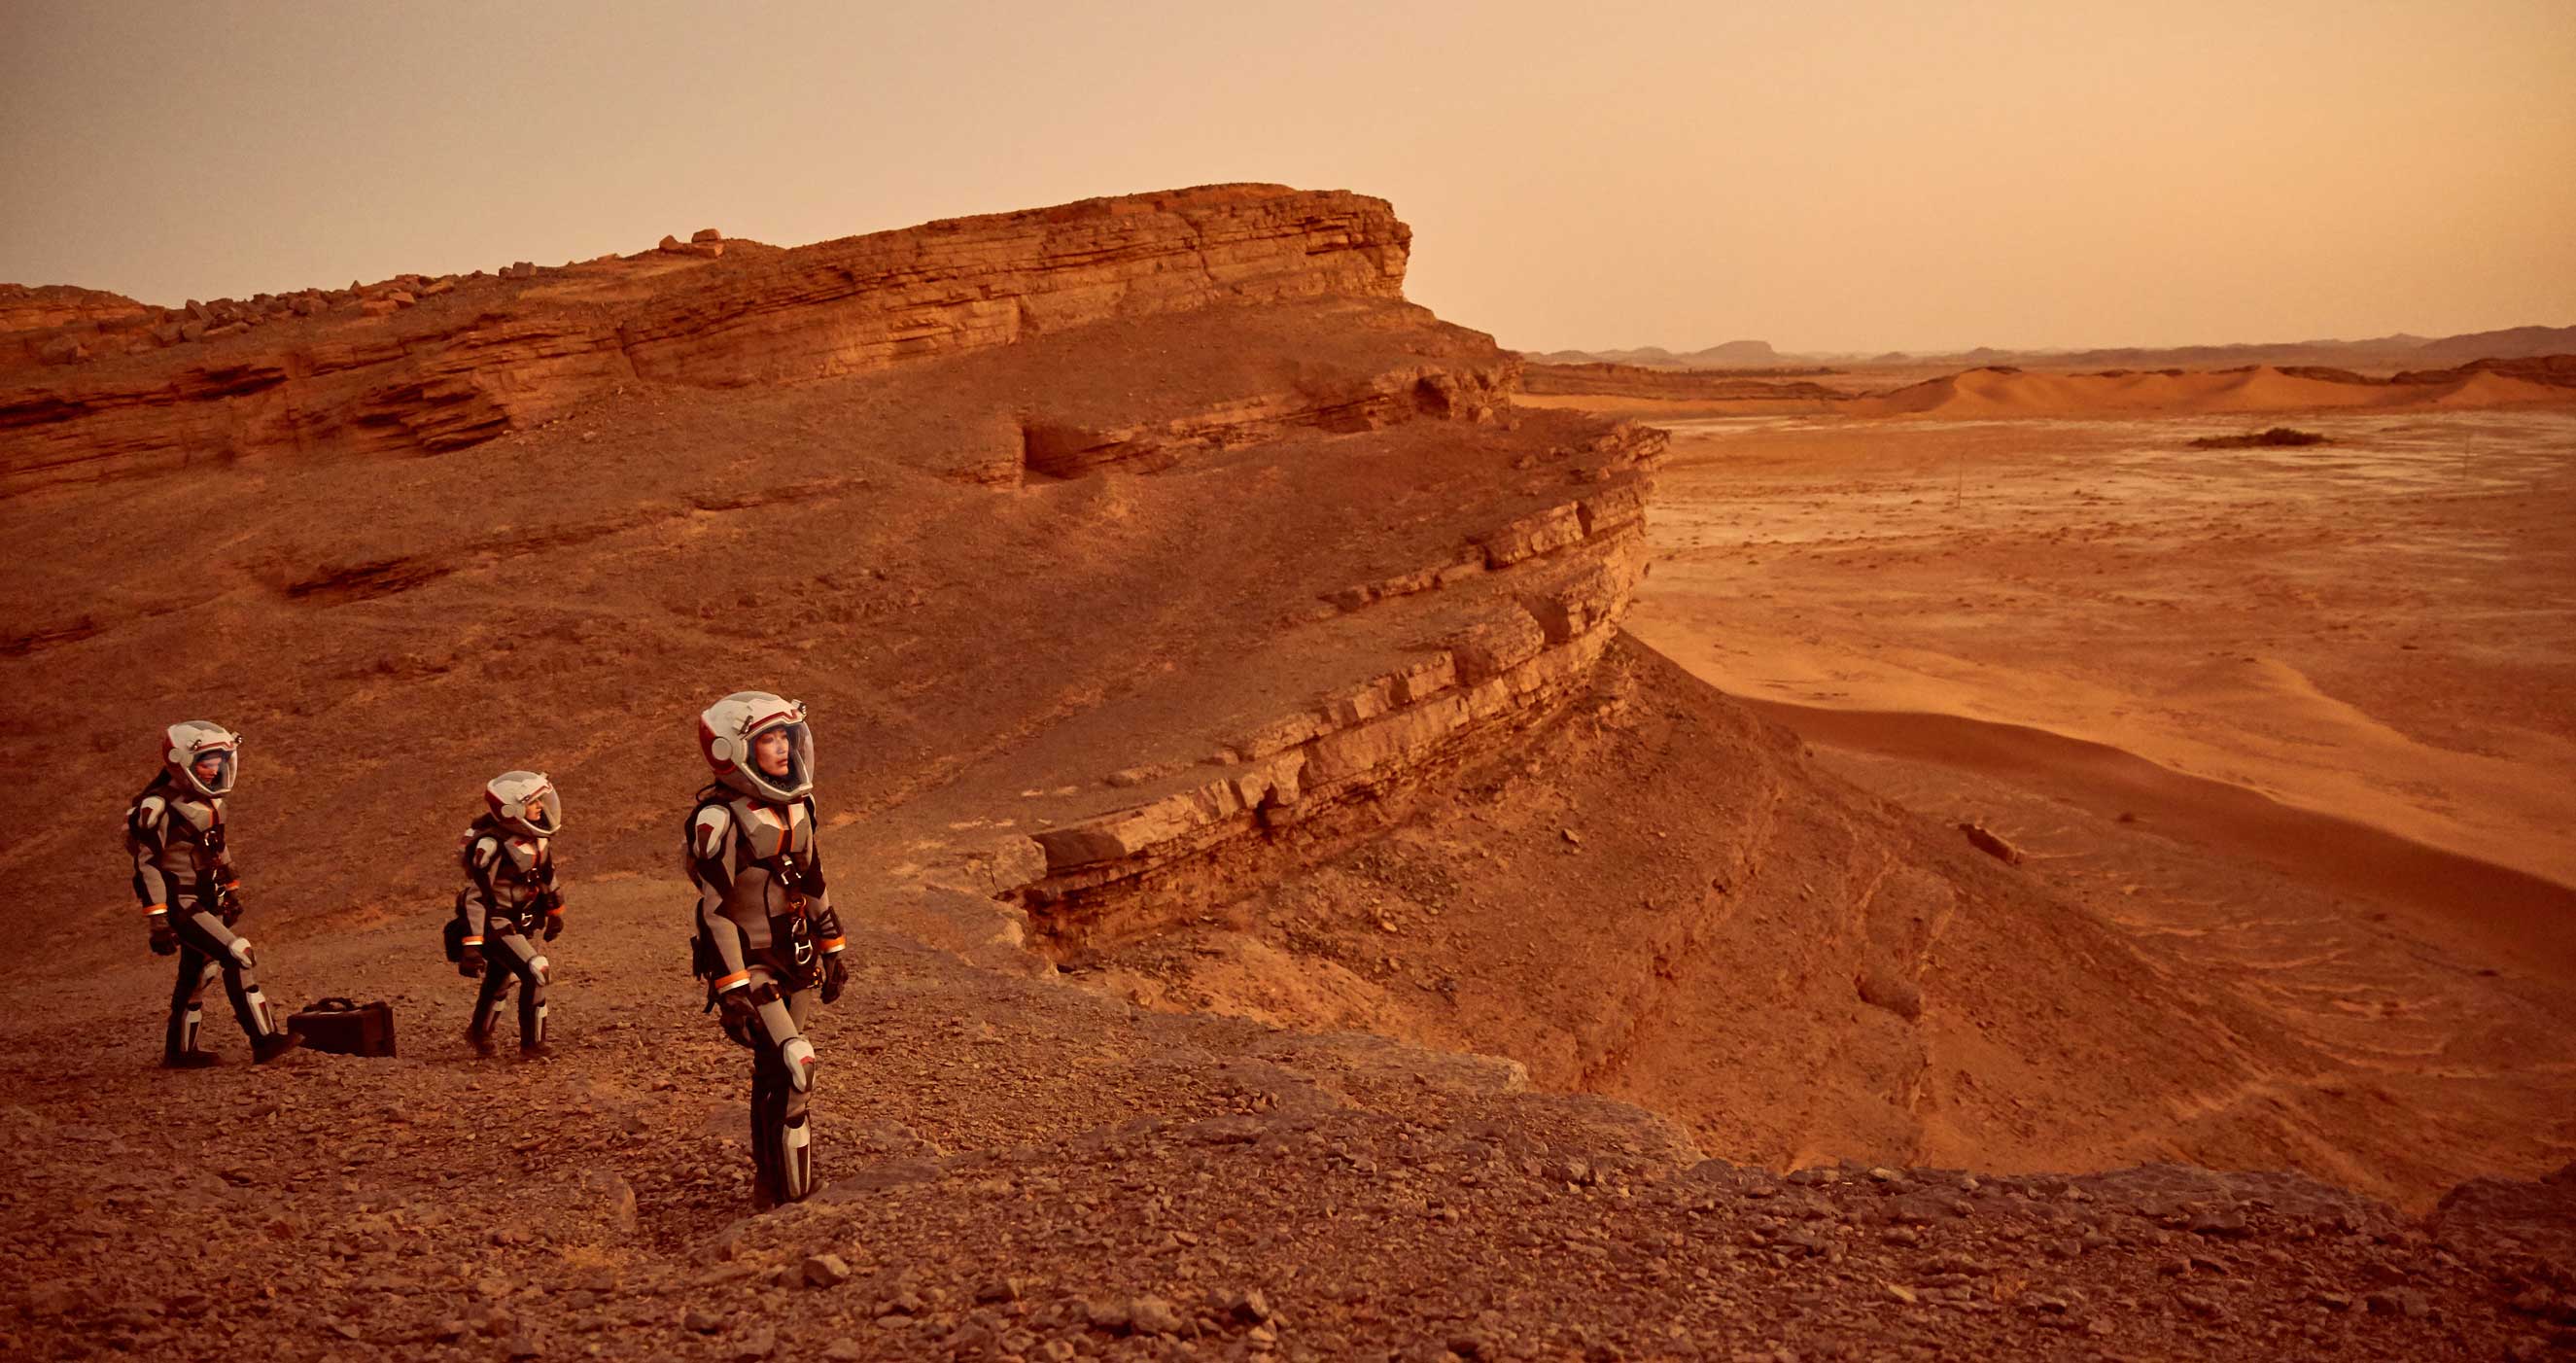 Fictional astronauts land on the Red Planet with technology firmly grounded in current research (National Geographic Channel)